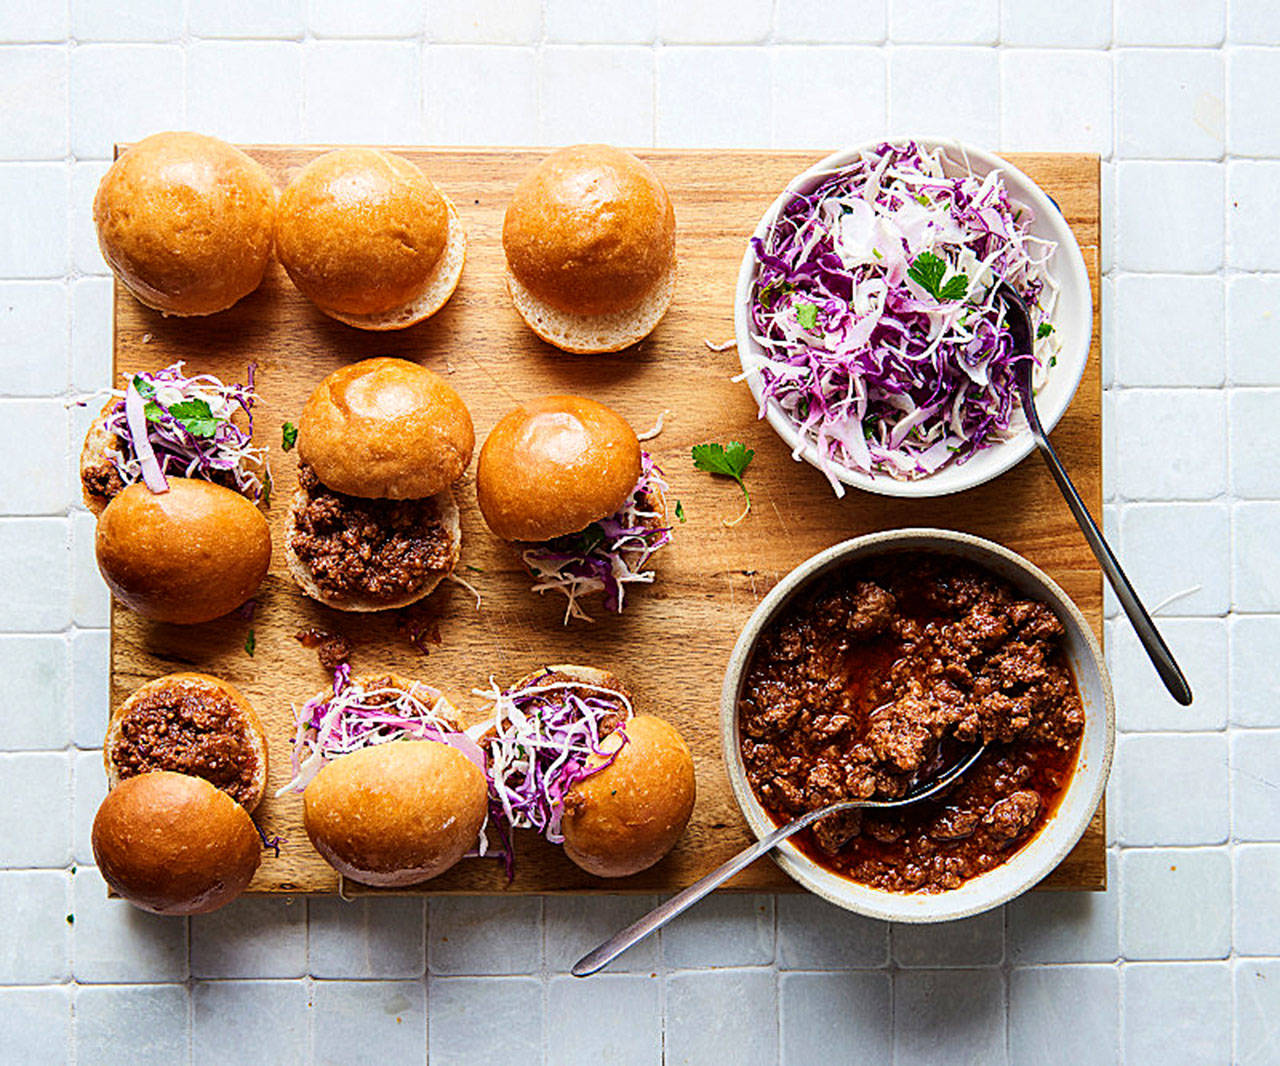 The Bardsley family loves the recipe for sloppy Joes found in “The Healthy Meal Prep Instant Pot Cookbook” by Carrie Forrest. (Marija Vidal)